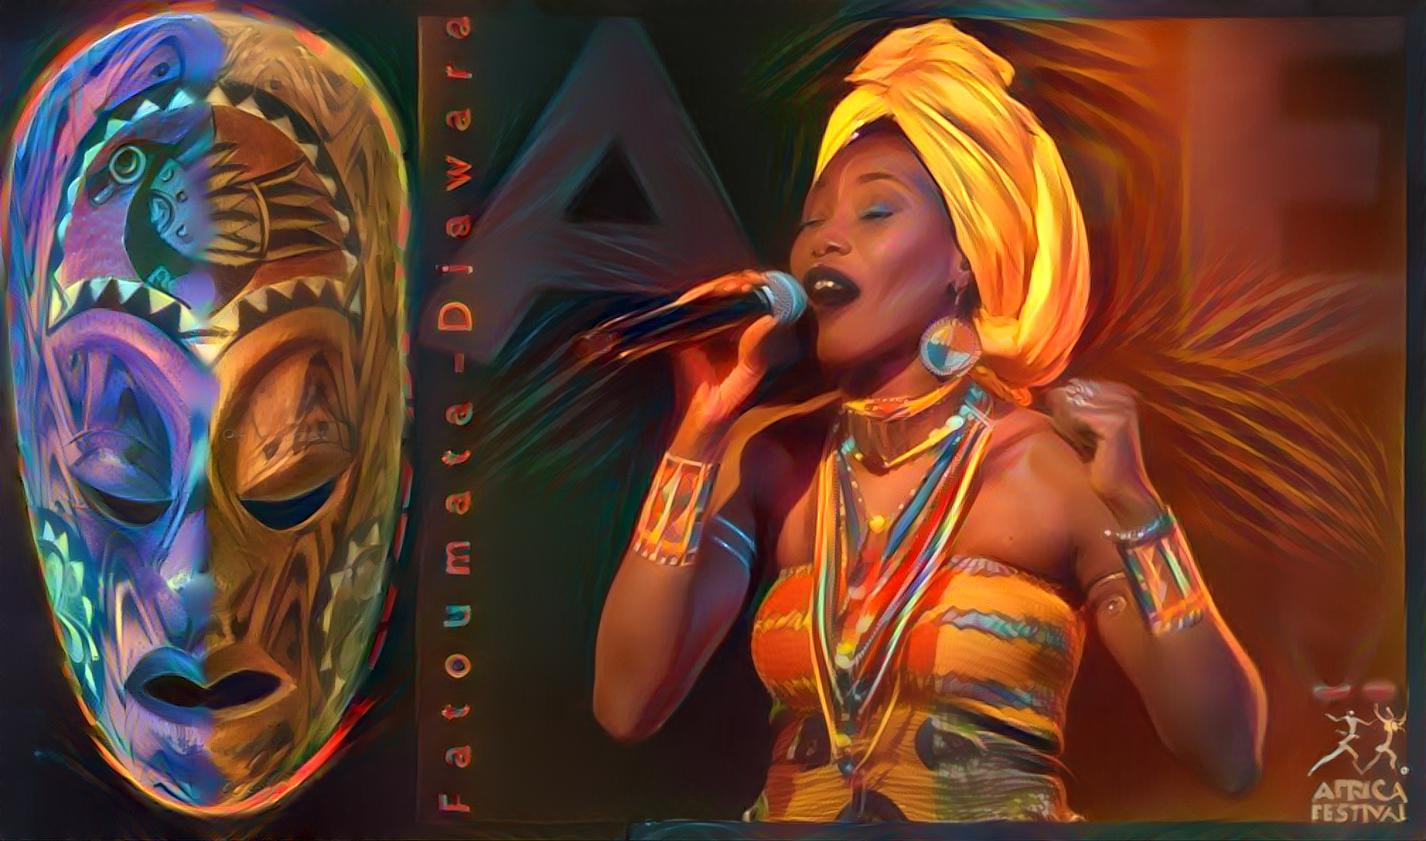 My fan page creation for the lovely and talented singer Fatoumata Diawara.